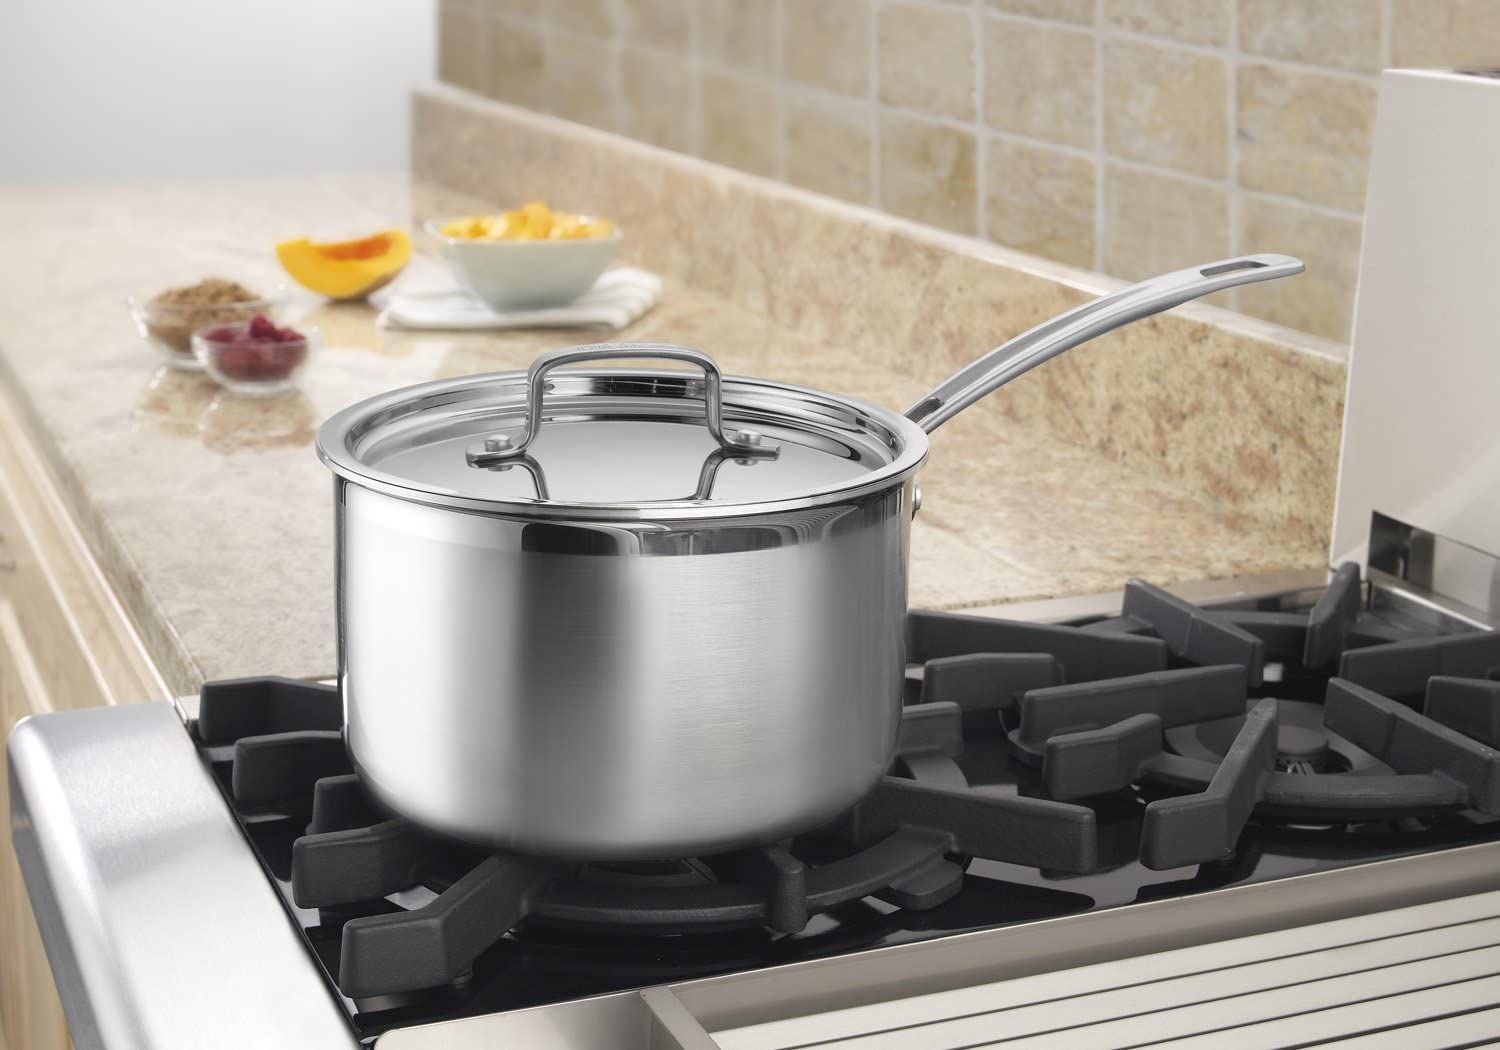 Cuisinart Professional Stainless Saucepan with Cover, 3-Quart